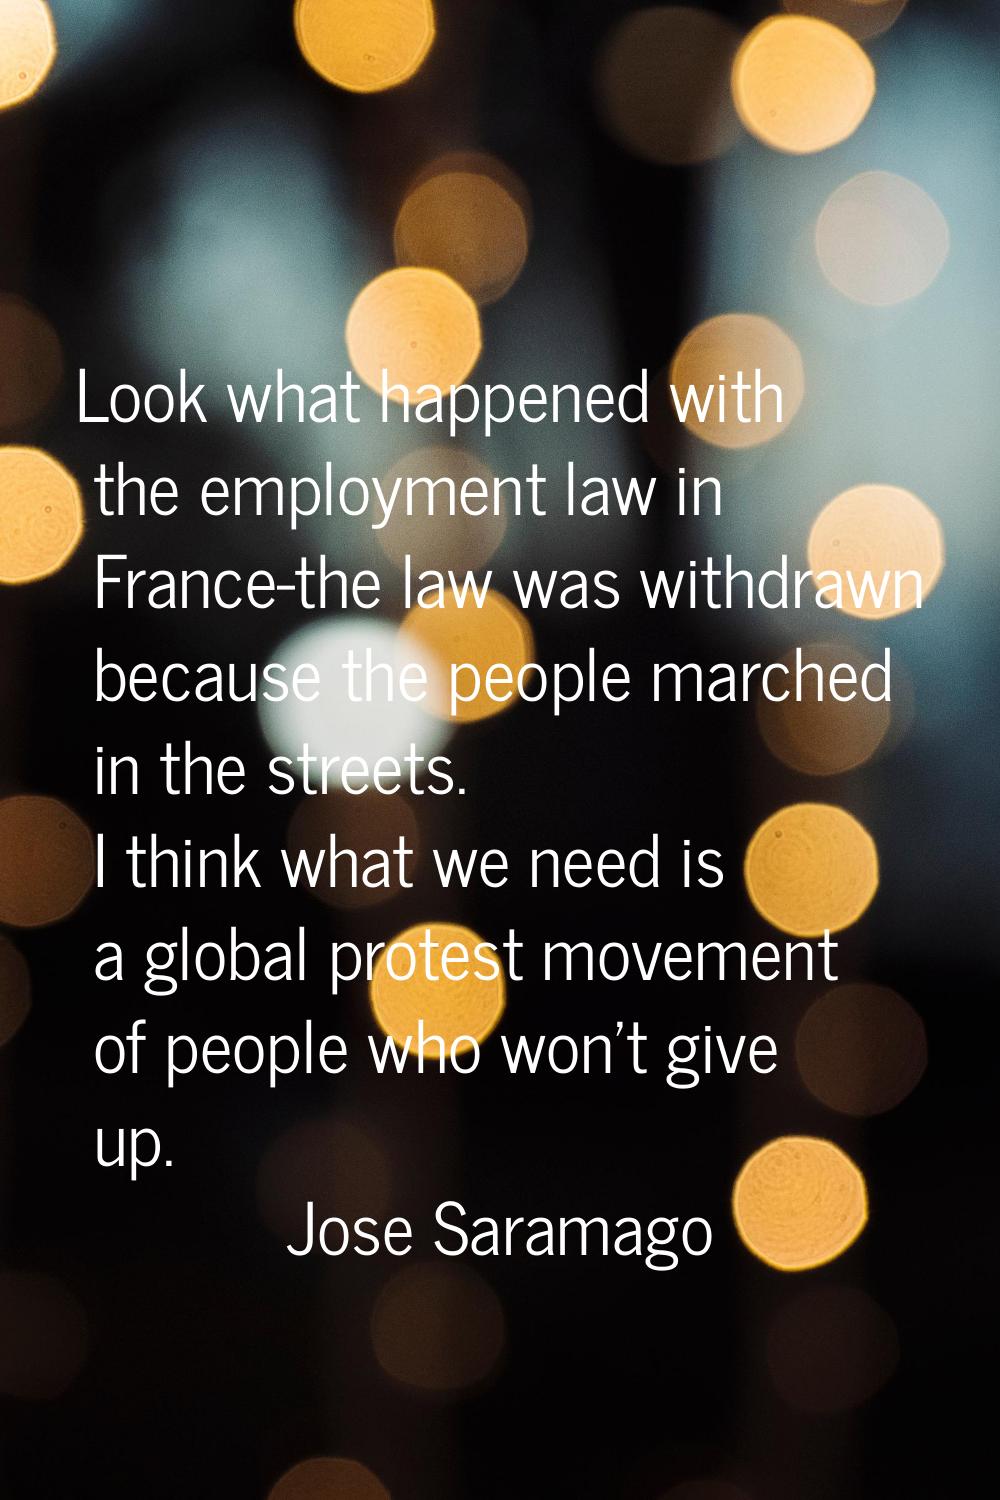 Look what happened with the employment law in France-the law was withdrawn because the people march